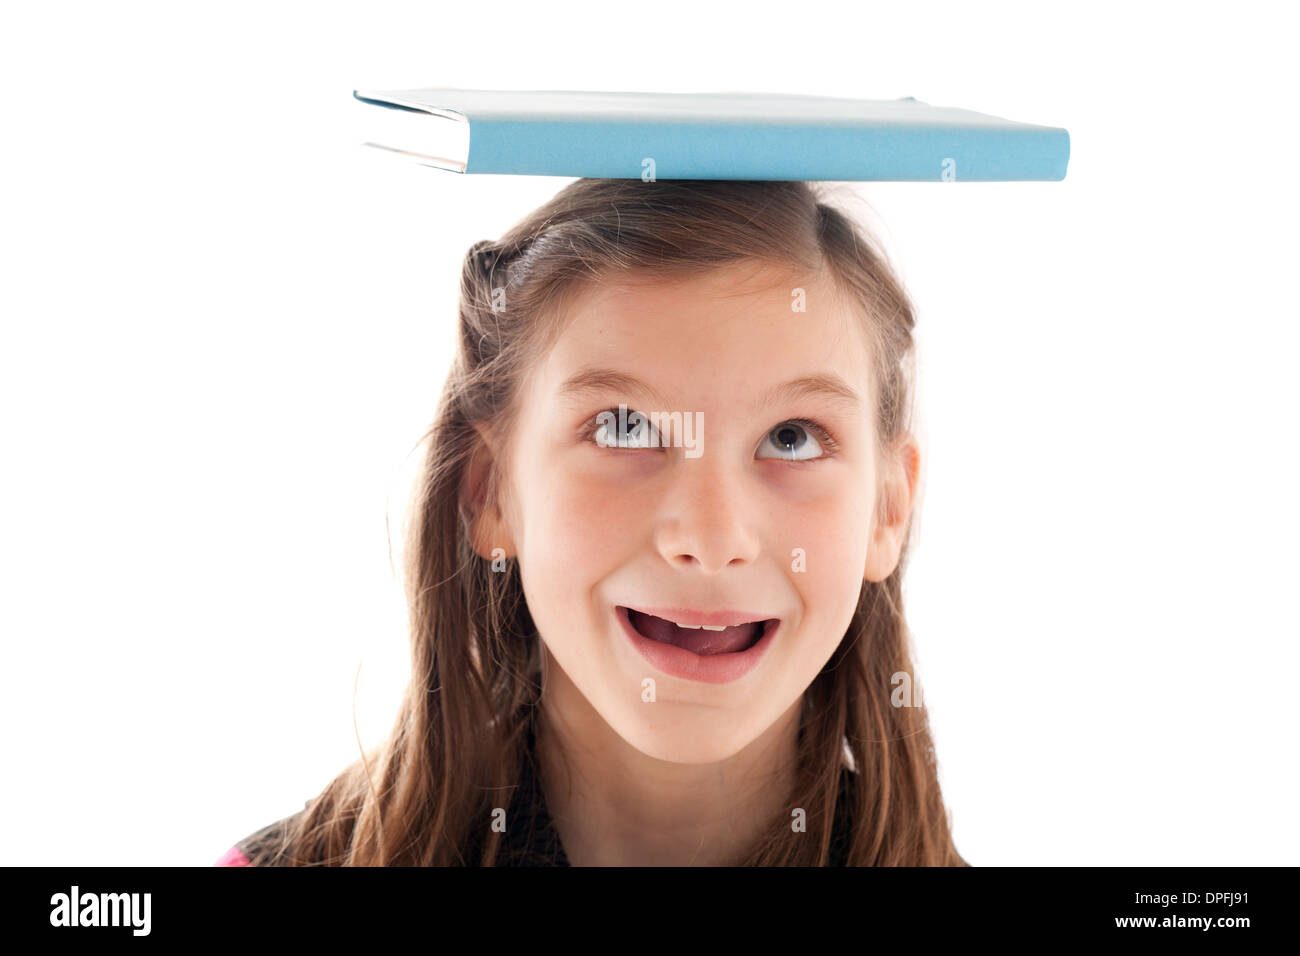 Symbolic picture education: Smiling girl holding a book on her head Stock Photo